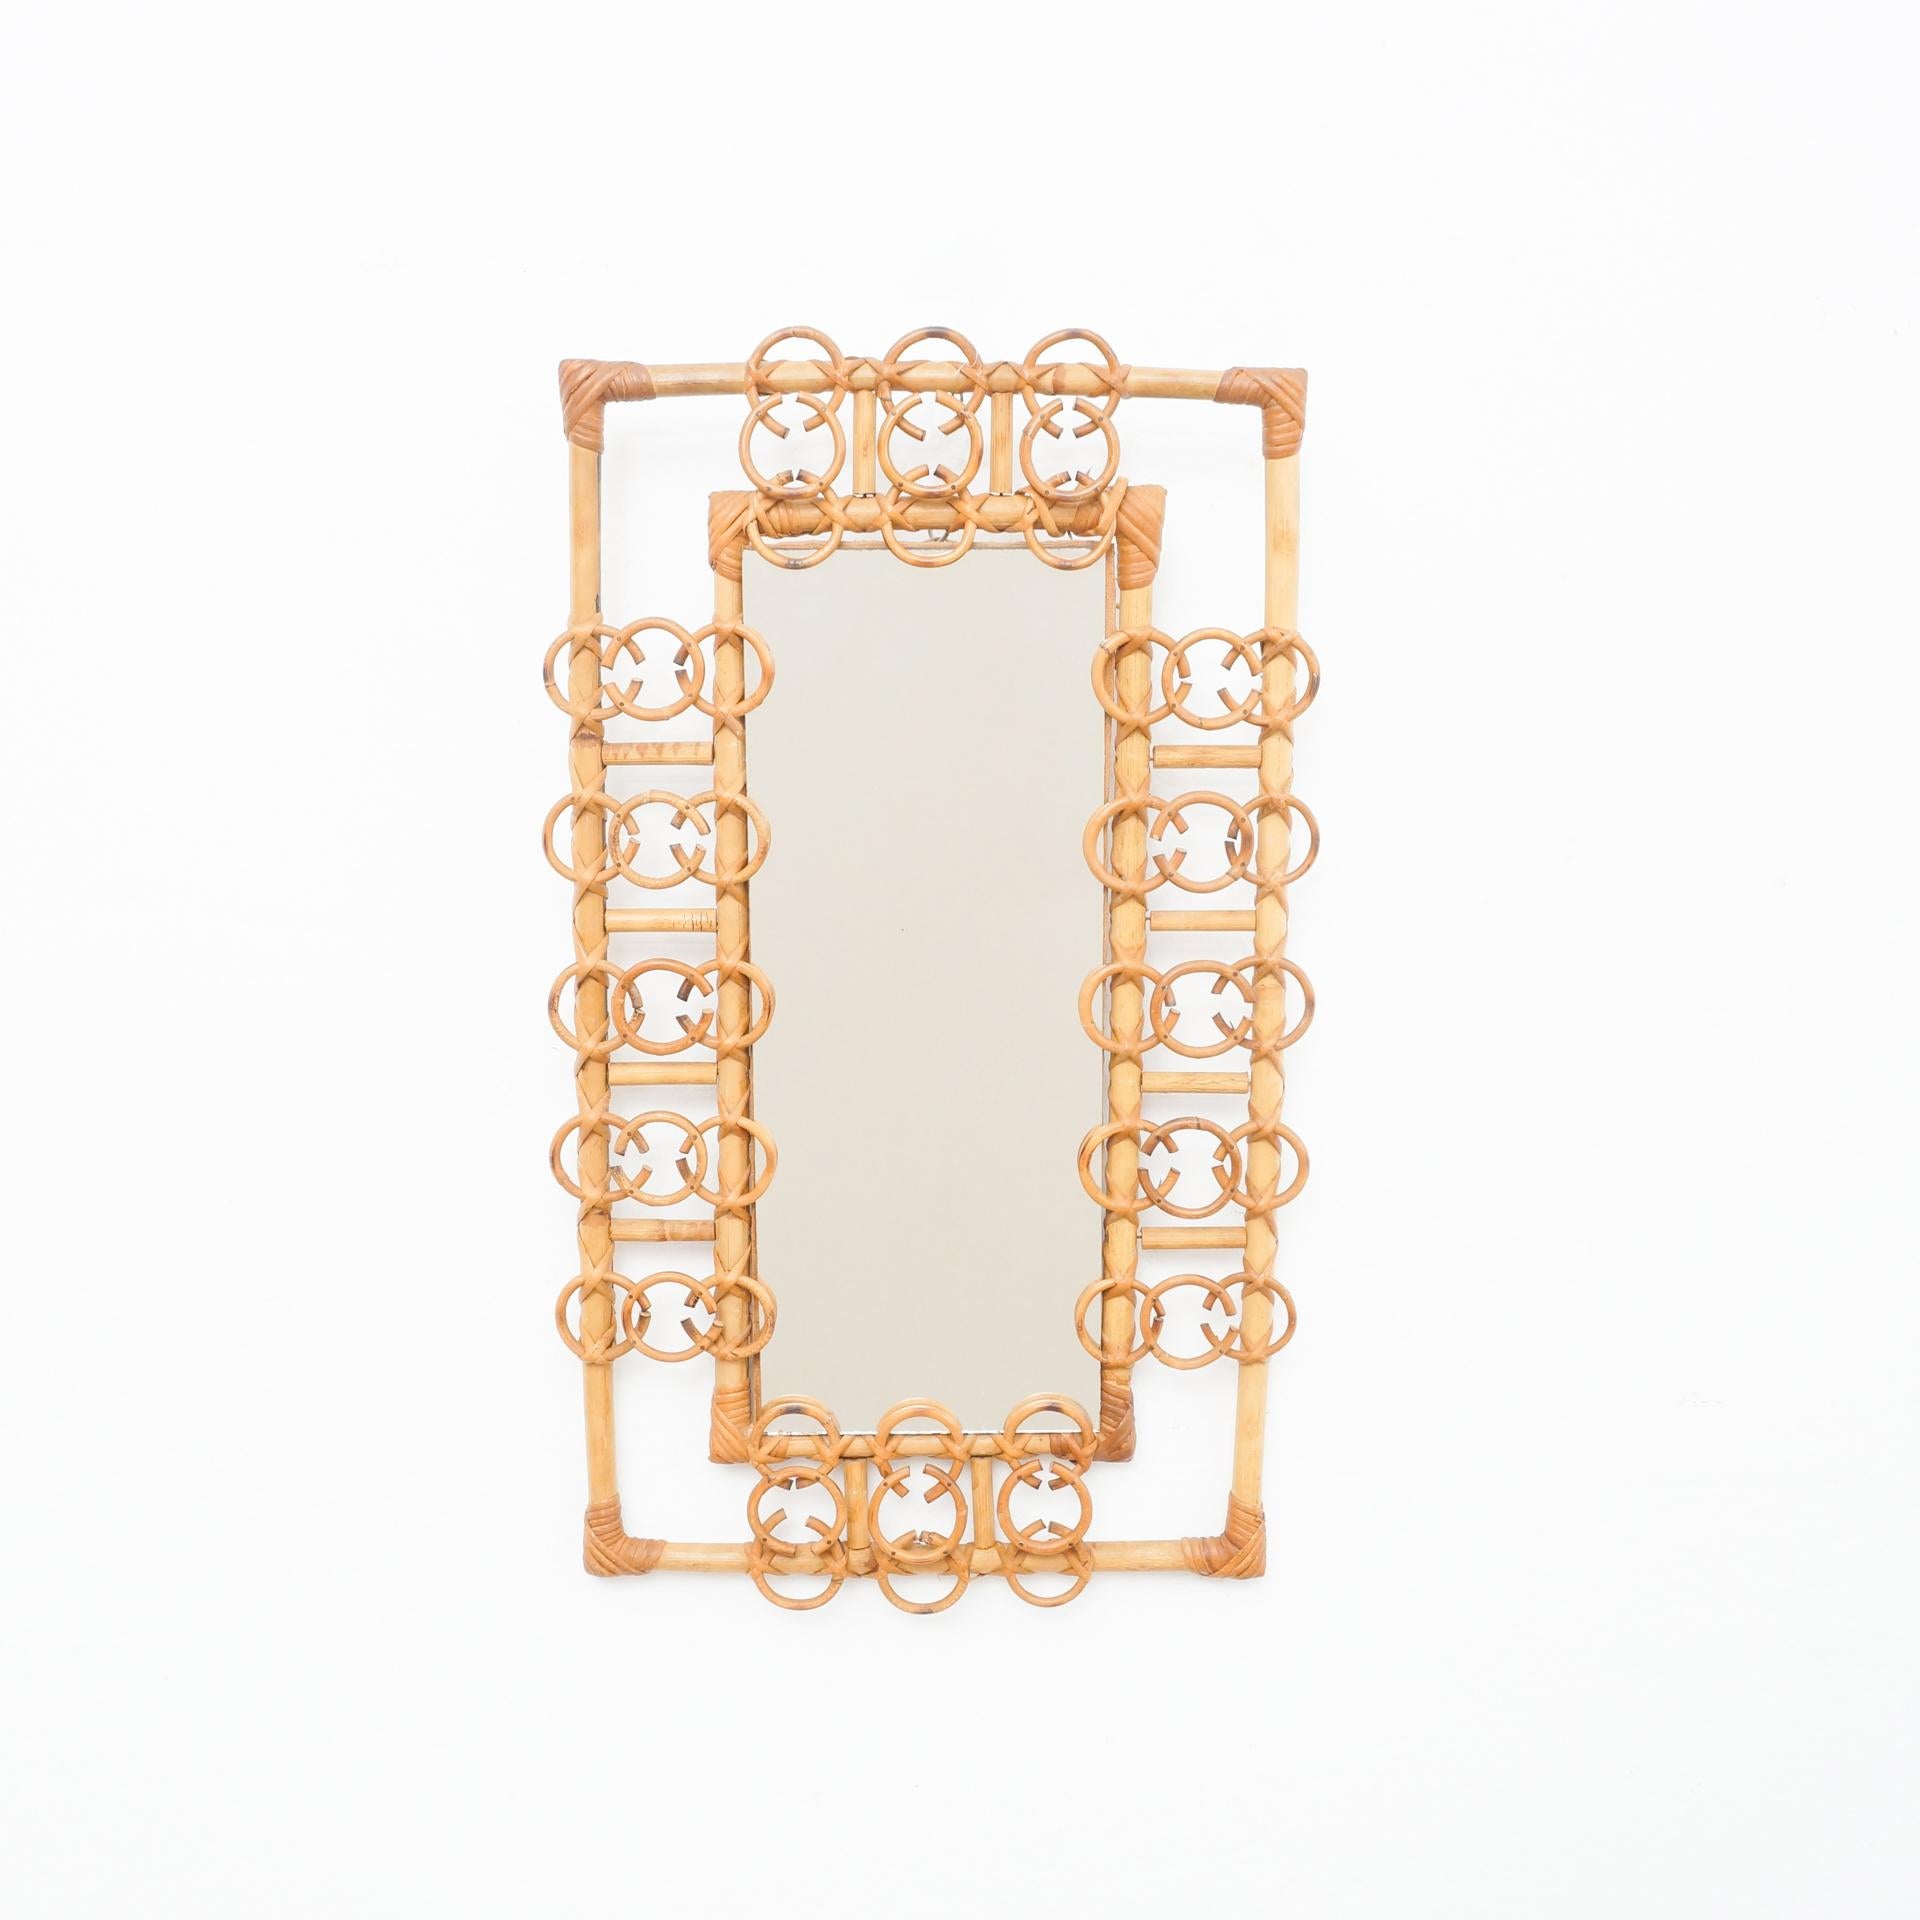 Spanish Mid-Century Modern Mirror Bamboo Rattan Handcrafted French Riviera, circa 1960 For Sale